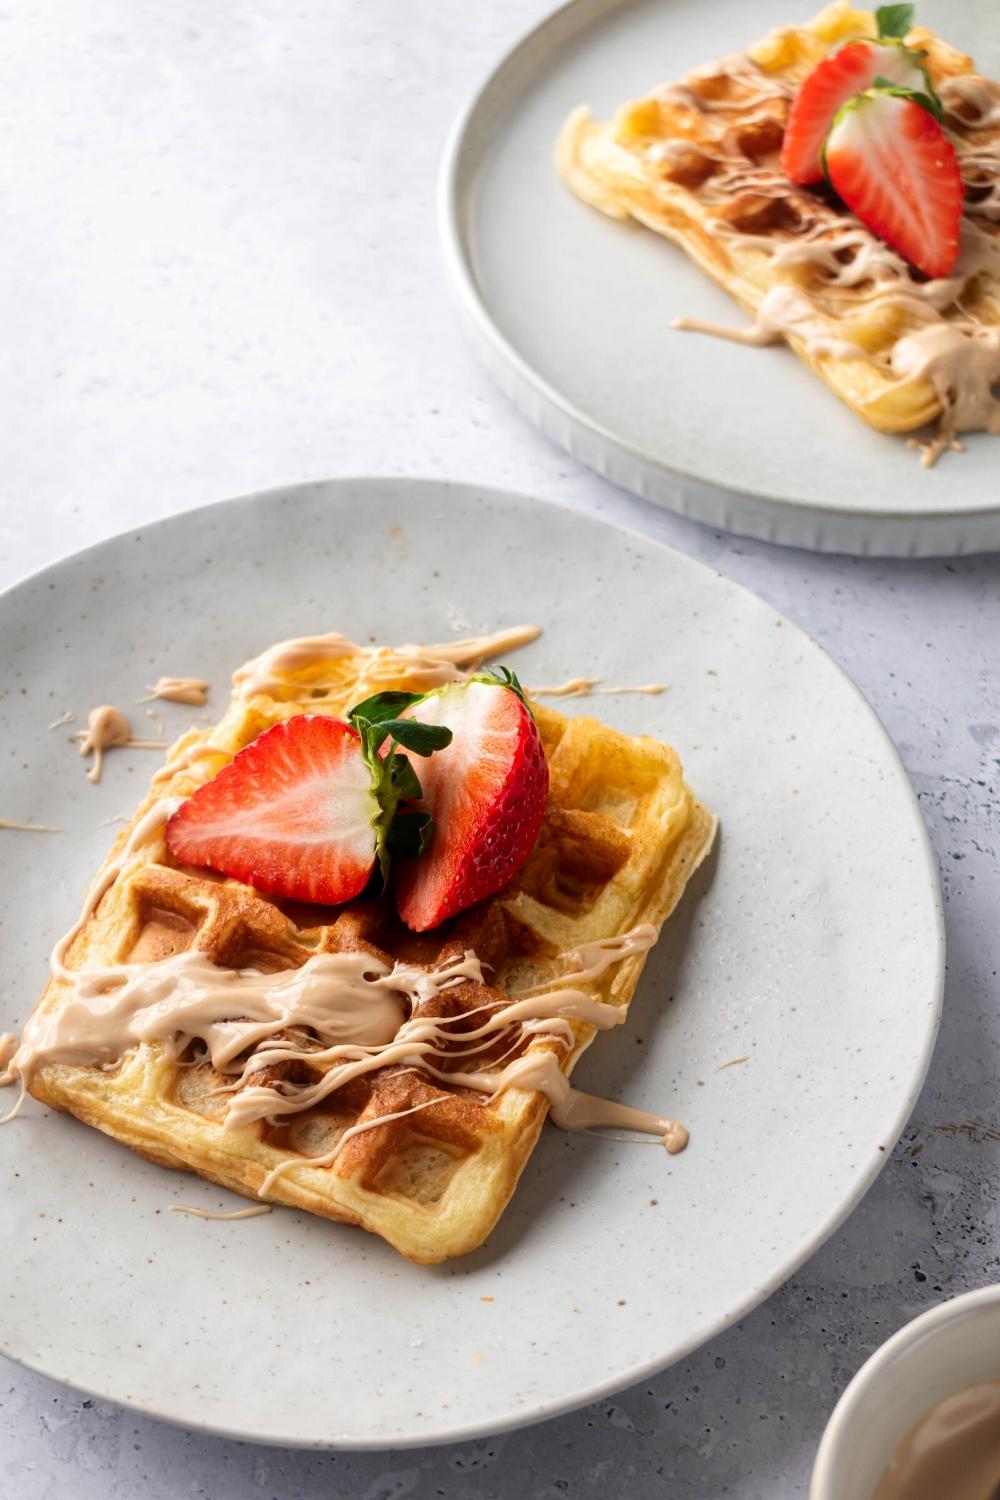 A waffle on top of a white plate with another waffle on a white plate behind it. Both waffles have a sliced strawberry on top and dolce de leche drizzled over it.